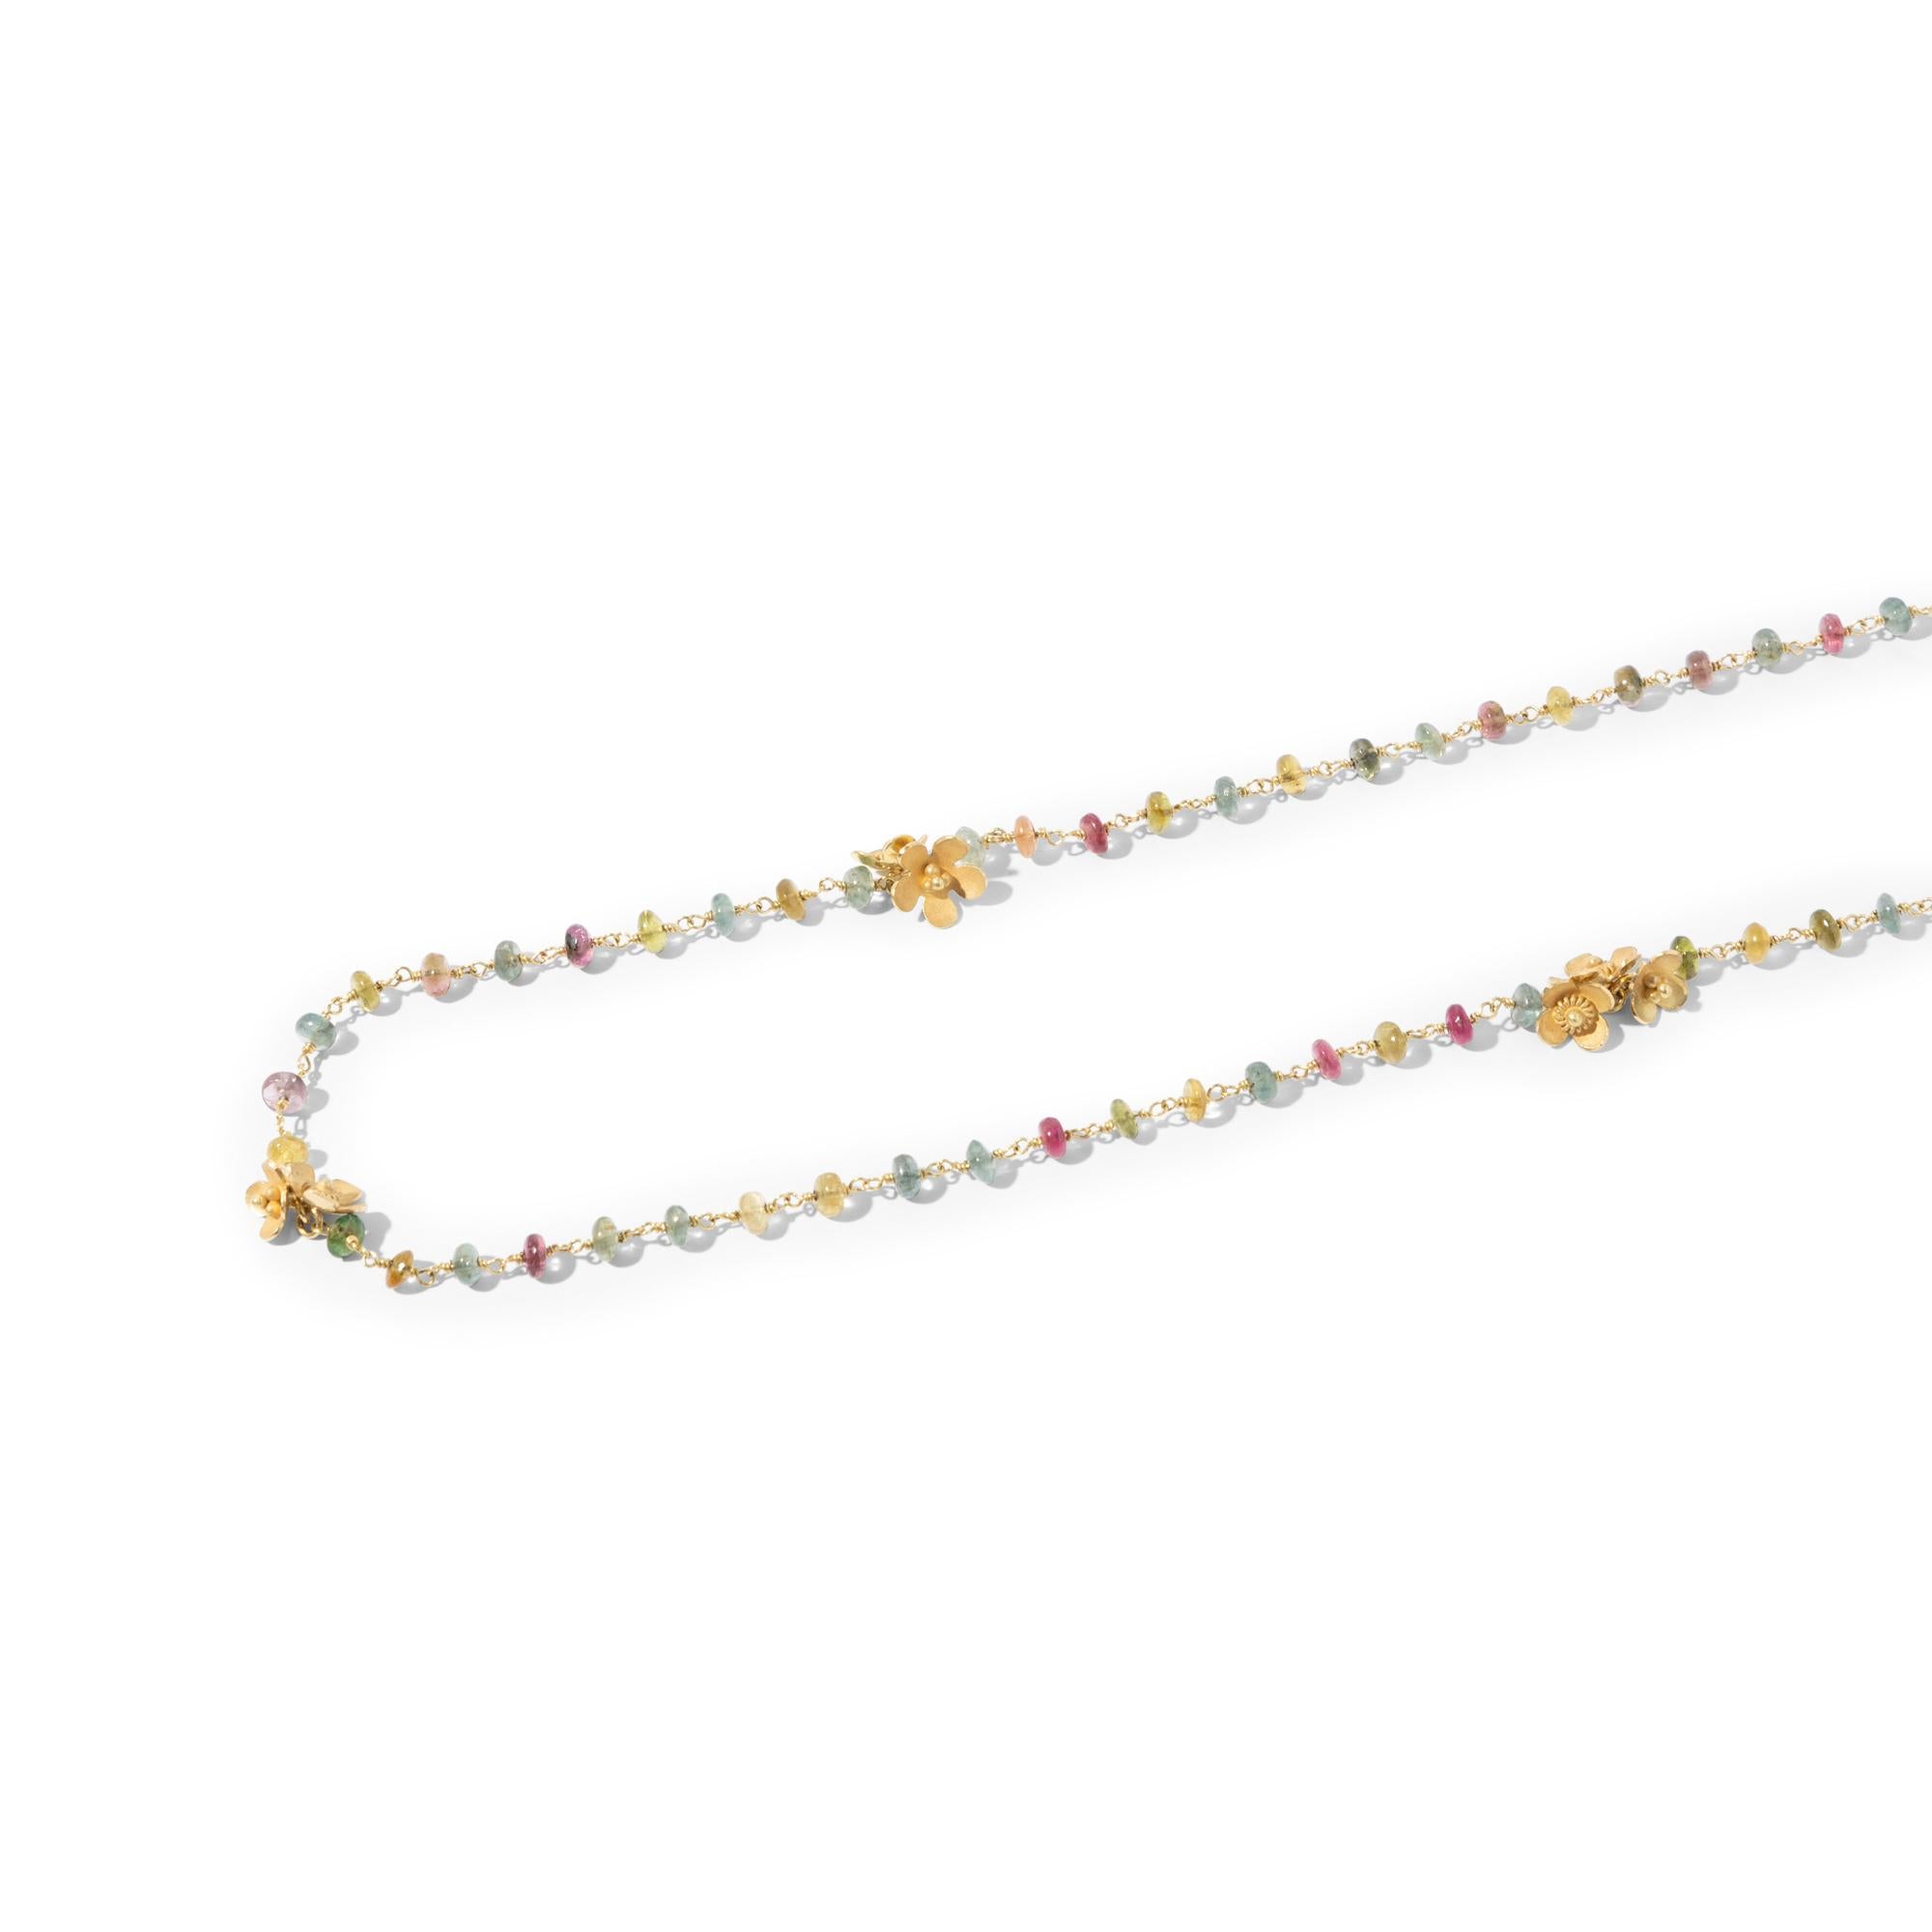 Artisan One-of-a-kind Handcrafted 18k Gold and Tourmaline Beads Sautoir Necklace For Sale